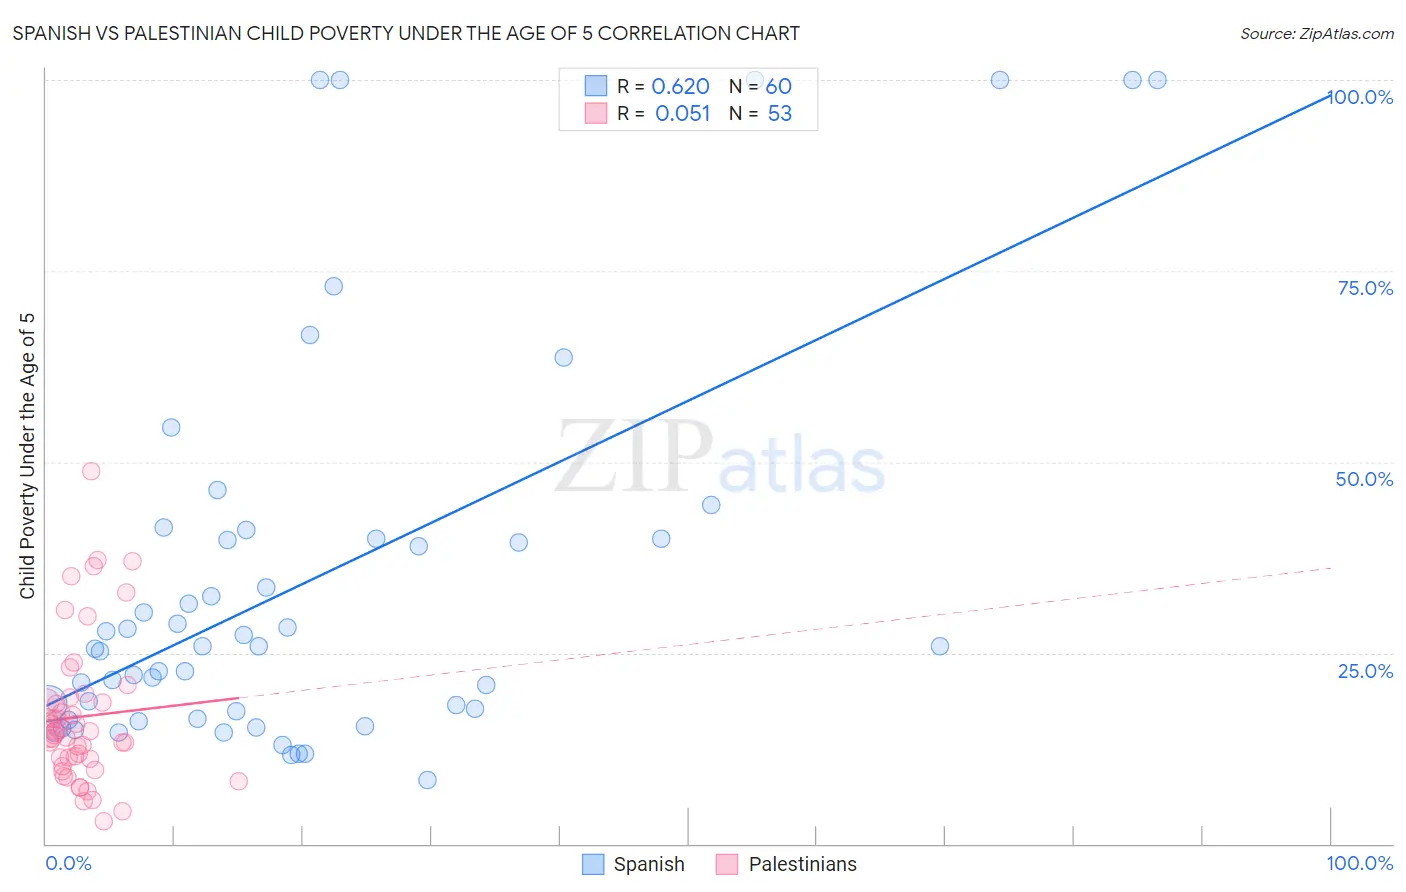 Spanish vs Palestinian Child Poverty Under the Age of 5